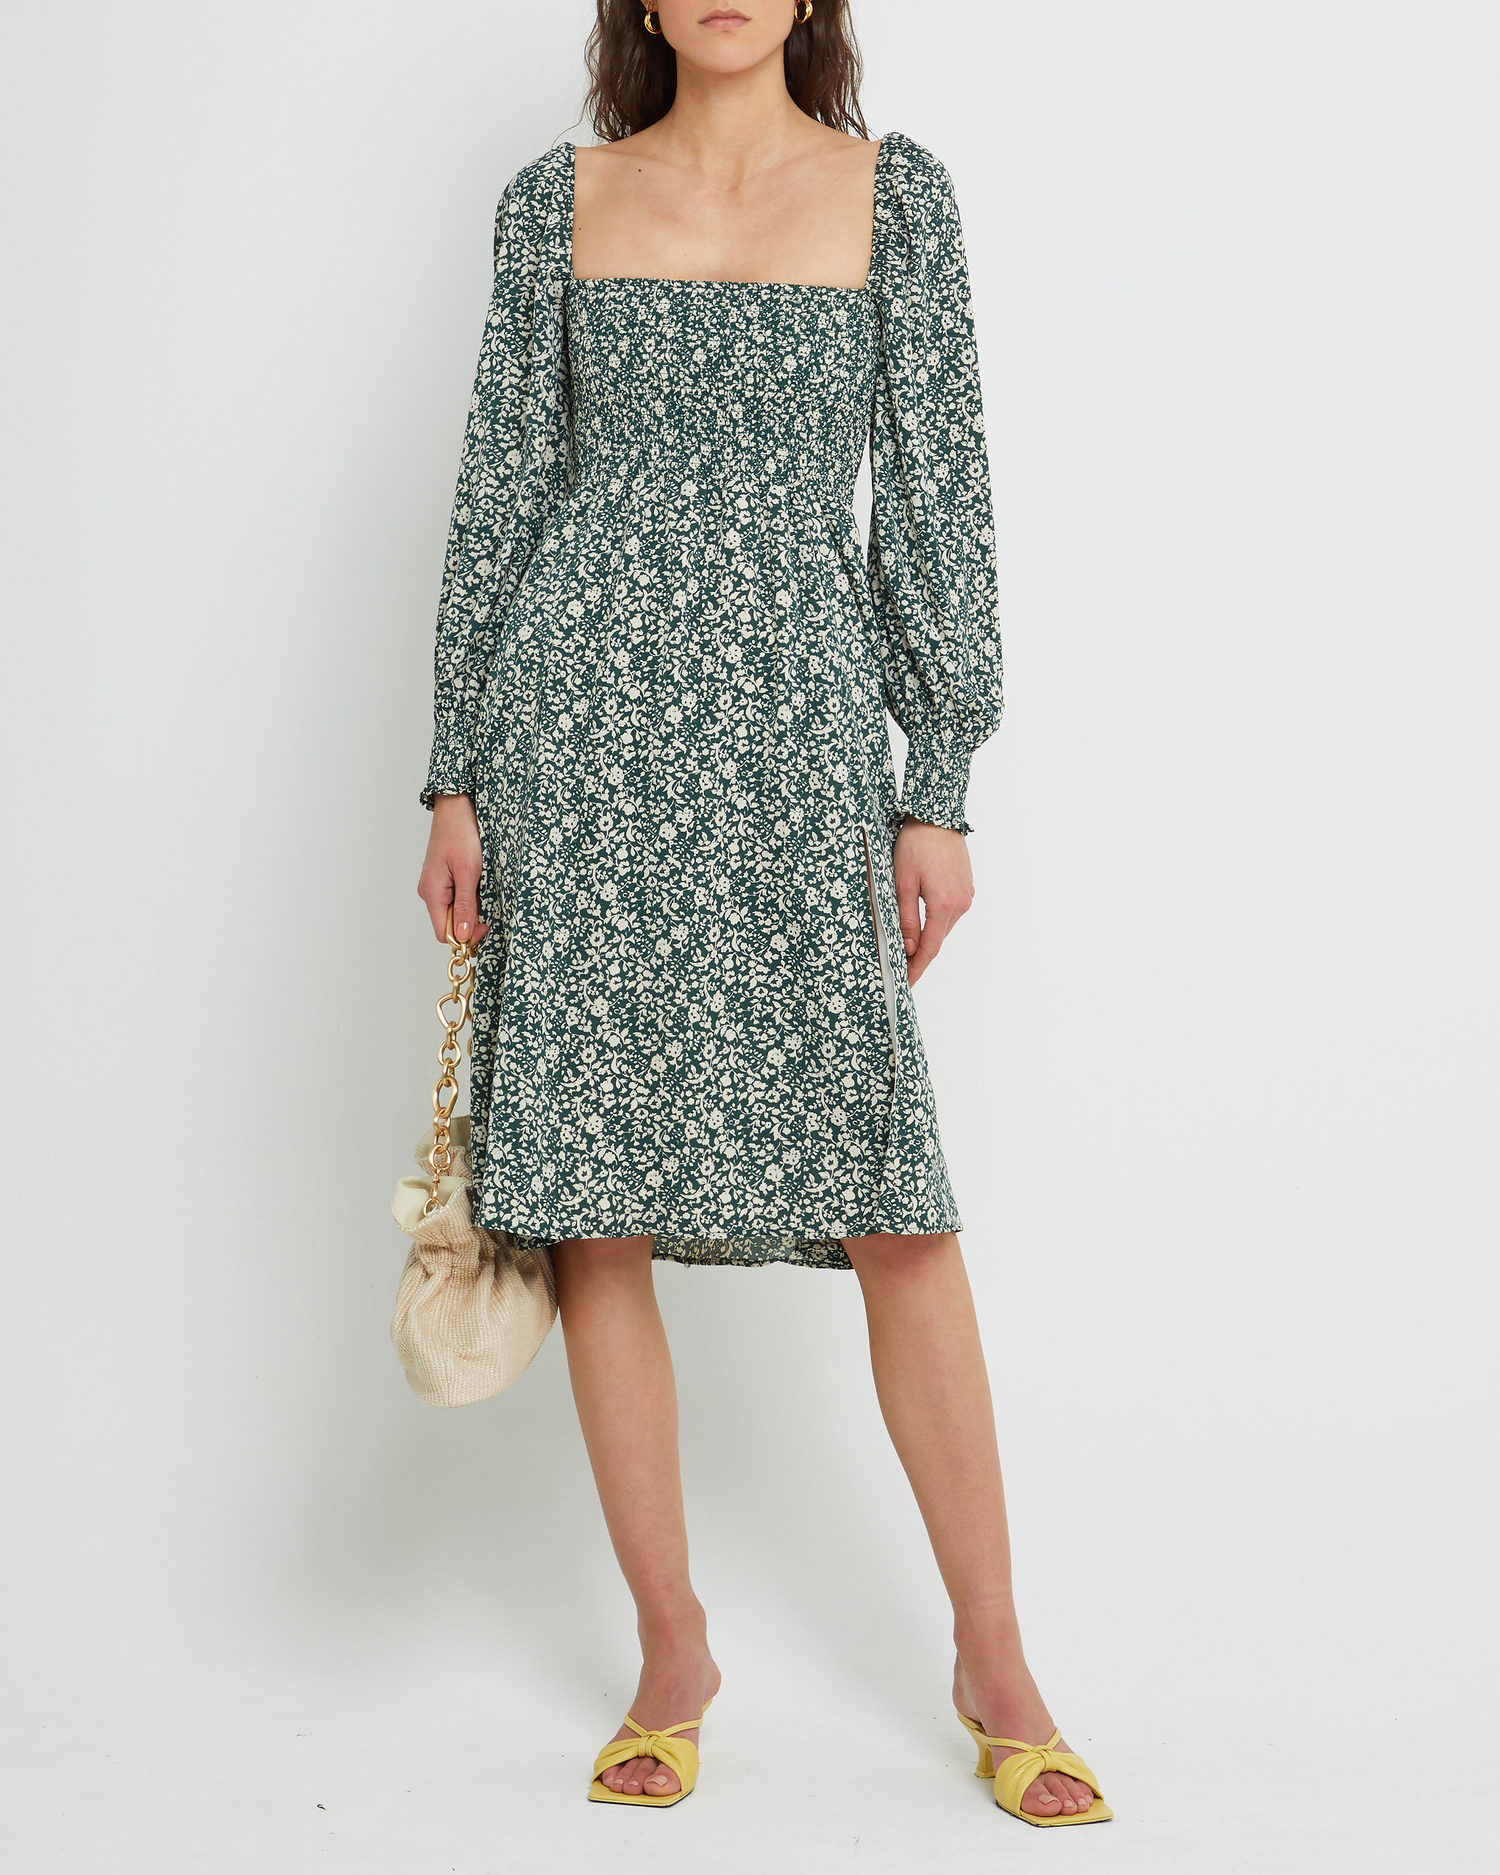 Fourth image of Classic Smocked Midi Dress, a green midi dress, side slit, long, sheer sleeves, puff sleeves, square neckline, smocked bodice